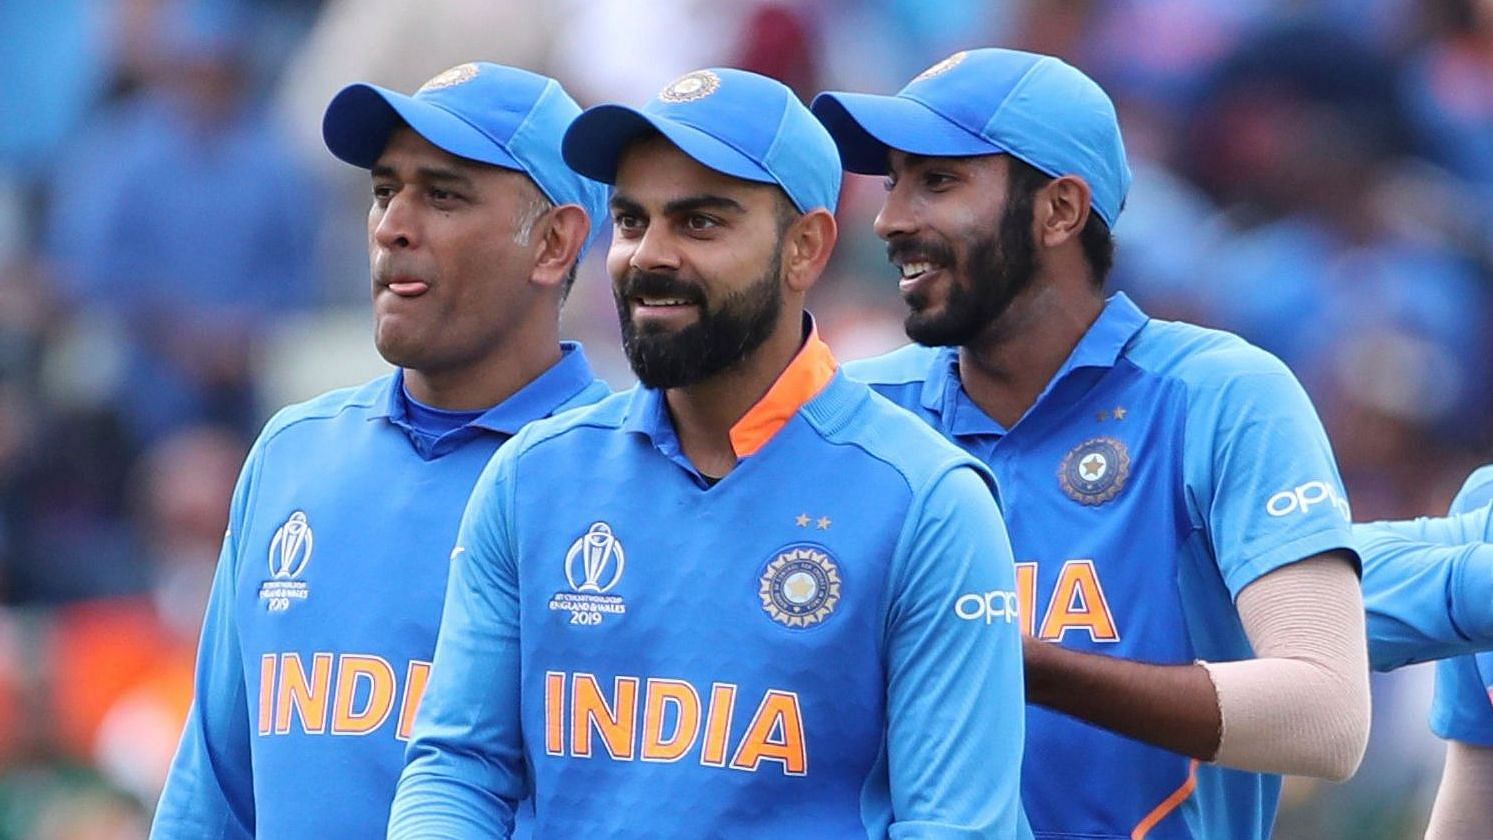 India’s captain Virat Kohli, second left, and teammates leave the field after their win over Bangladesh in the Cricket World Cup match at Edgbaston.